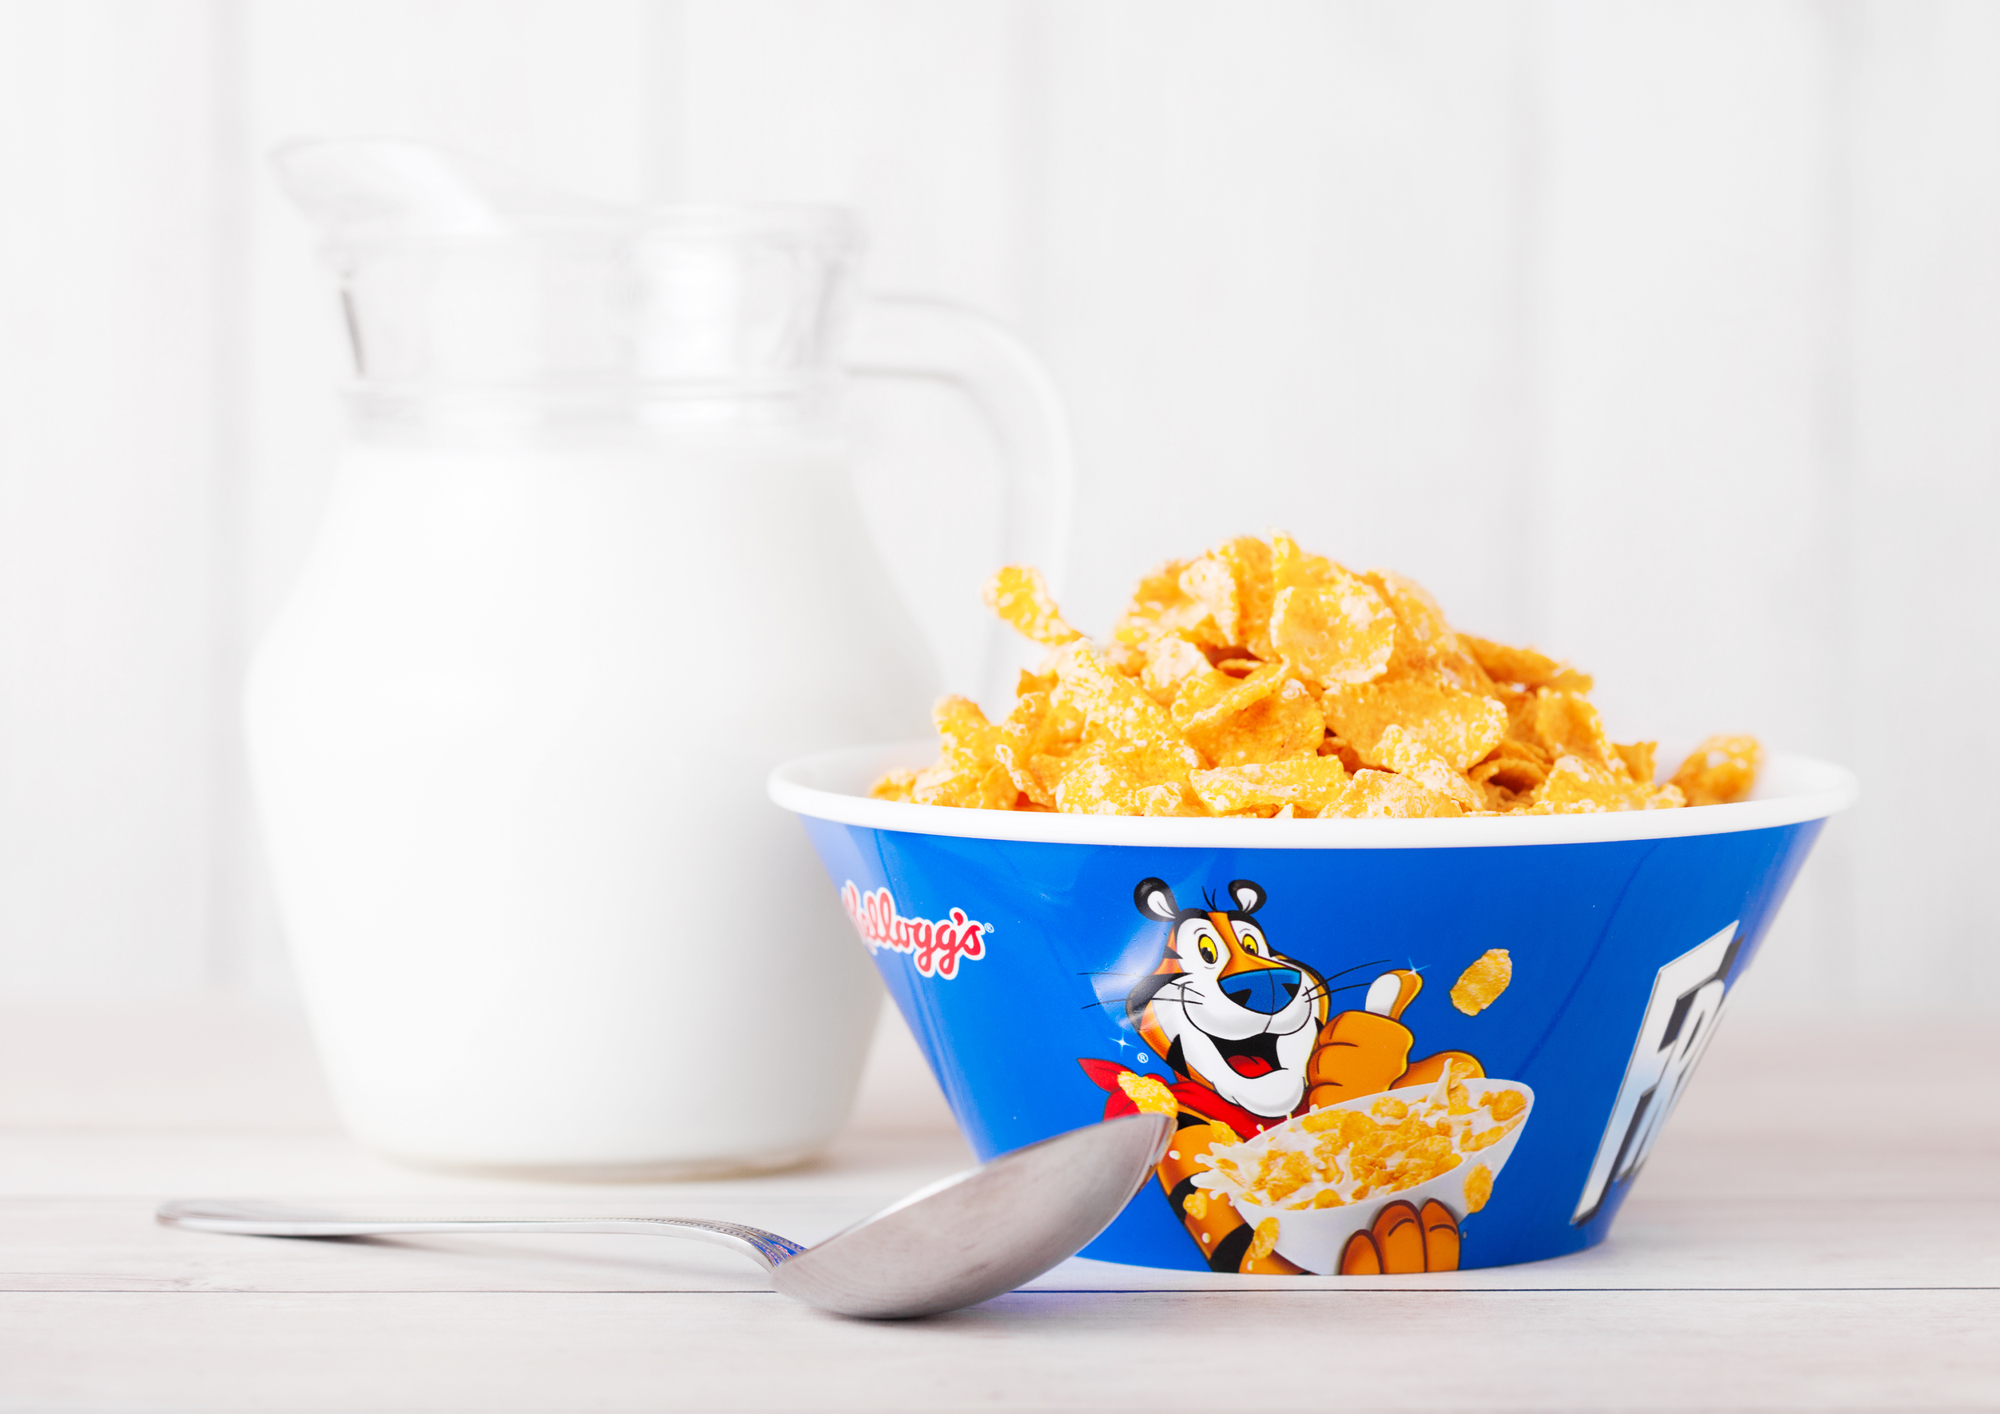 https://ditchthewheat.com/wp-content/uploads/2023/07/Are-Frosted-Flakes-Gluten-Free-3.jpg